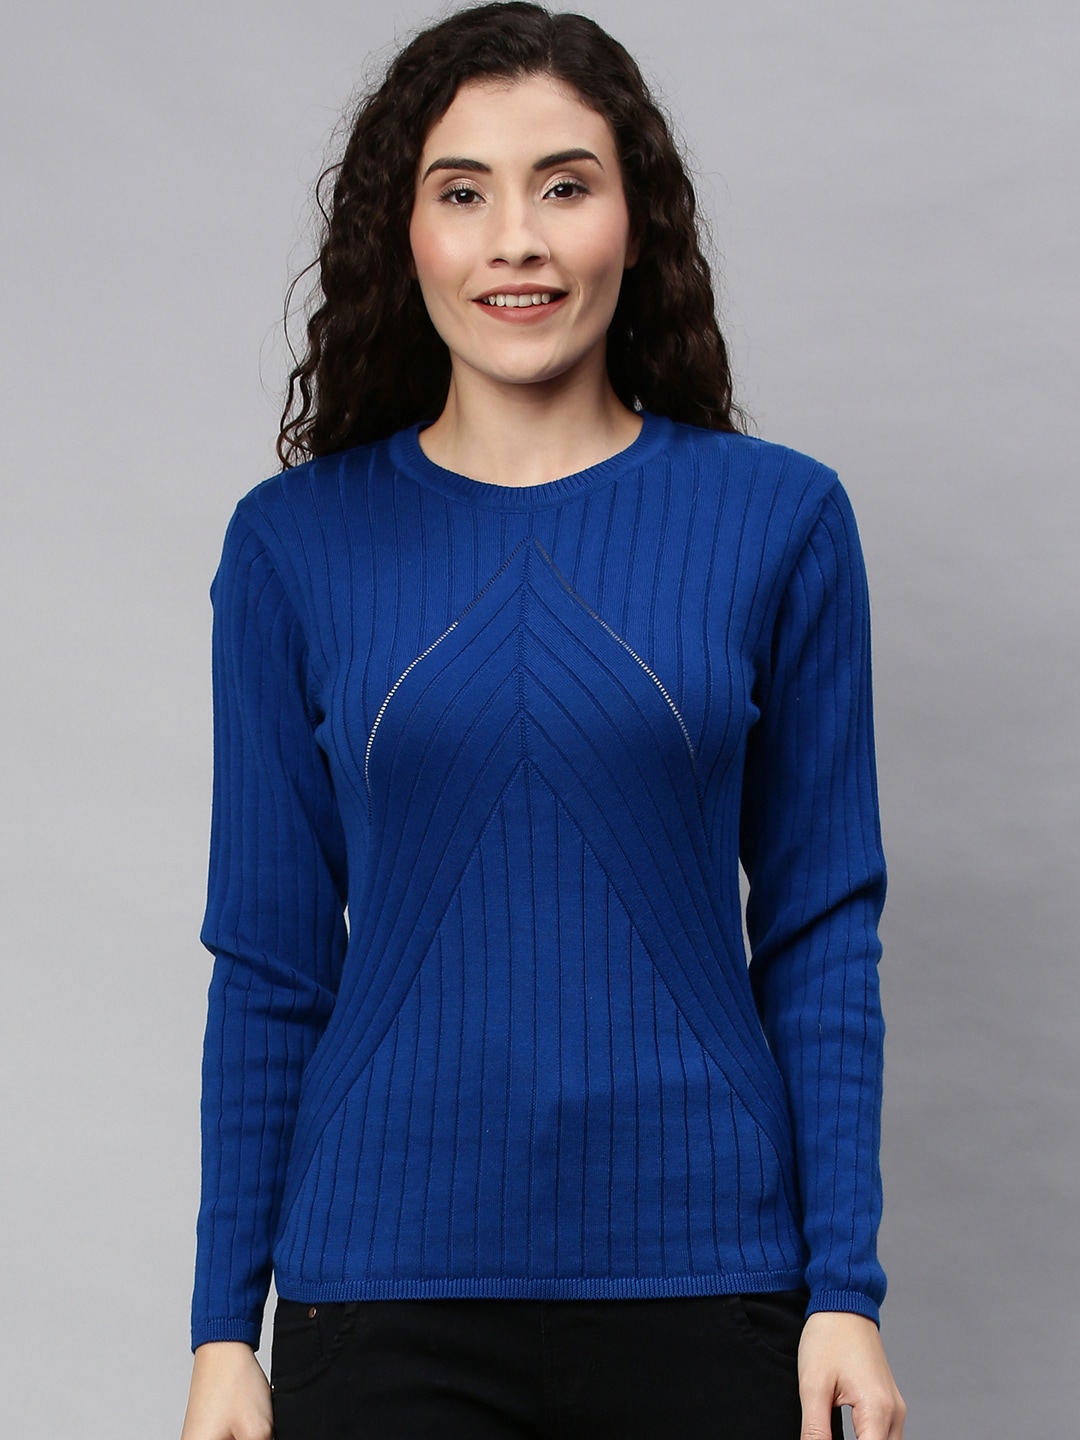 ONLY Women Blue Self-Striped Cotton Pullover Sweater Price in India